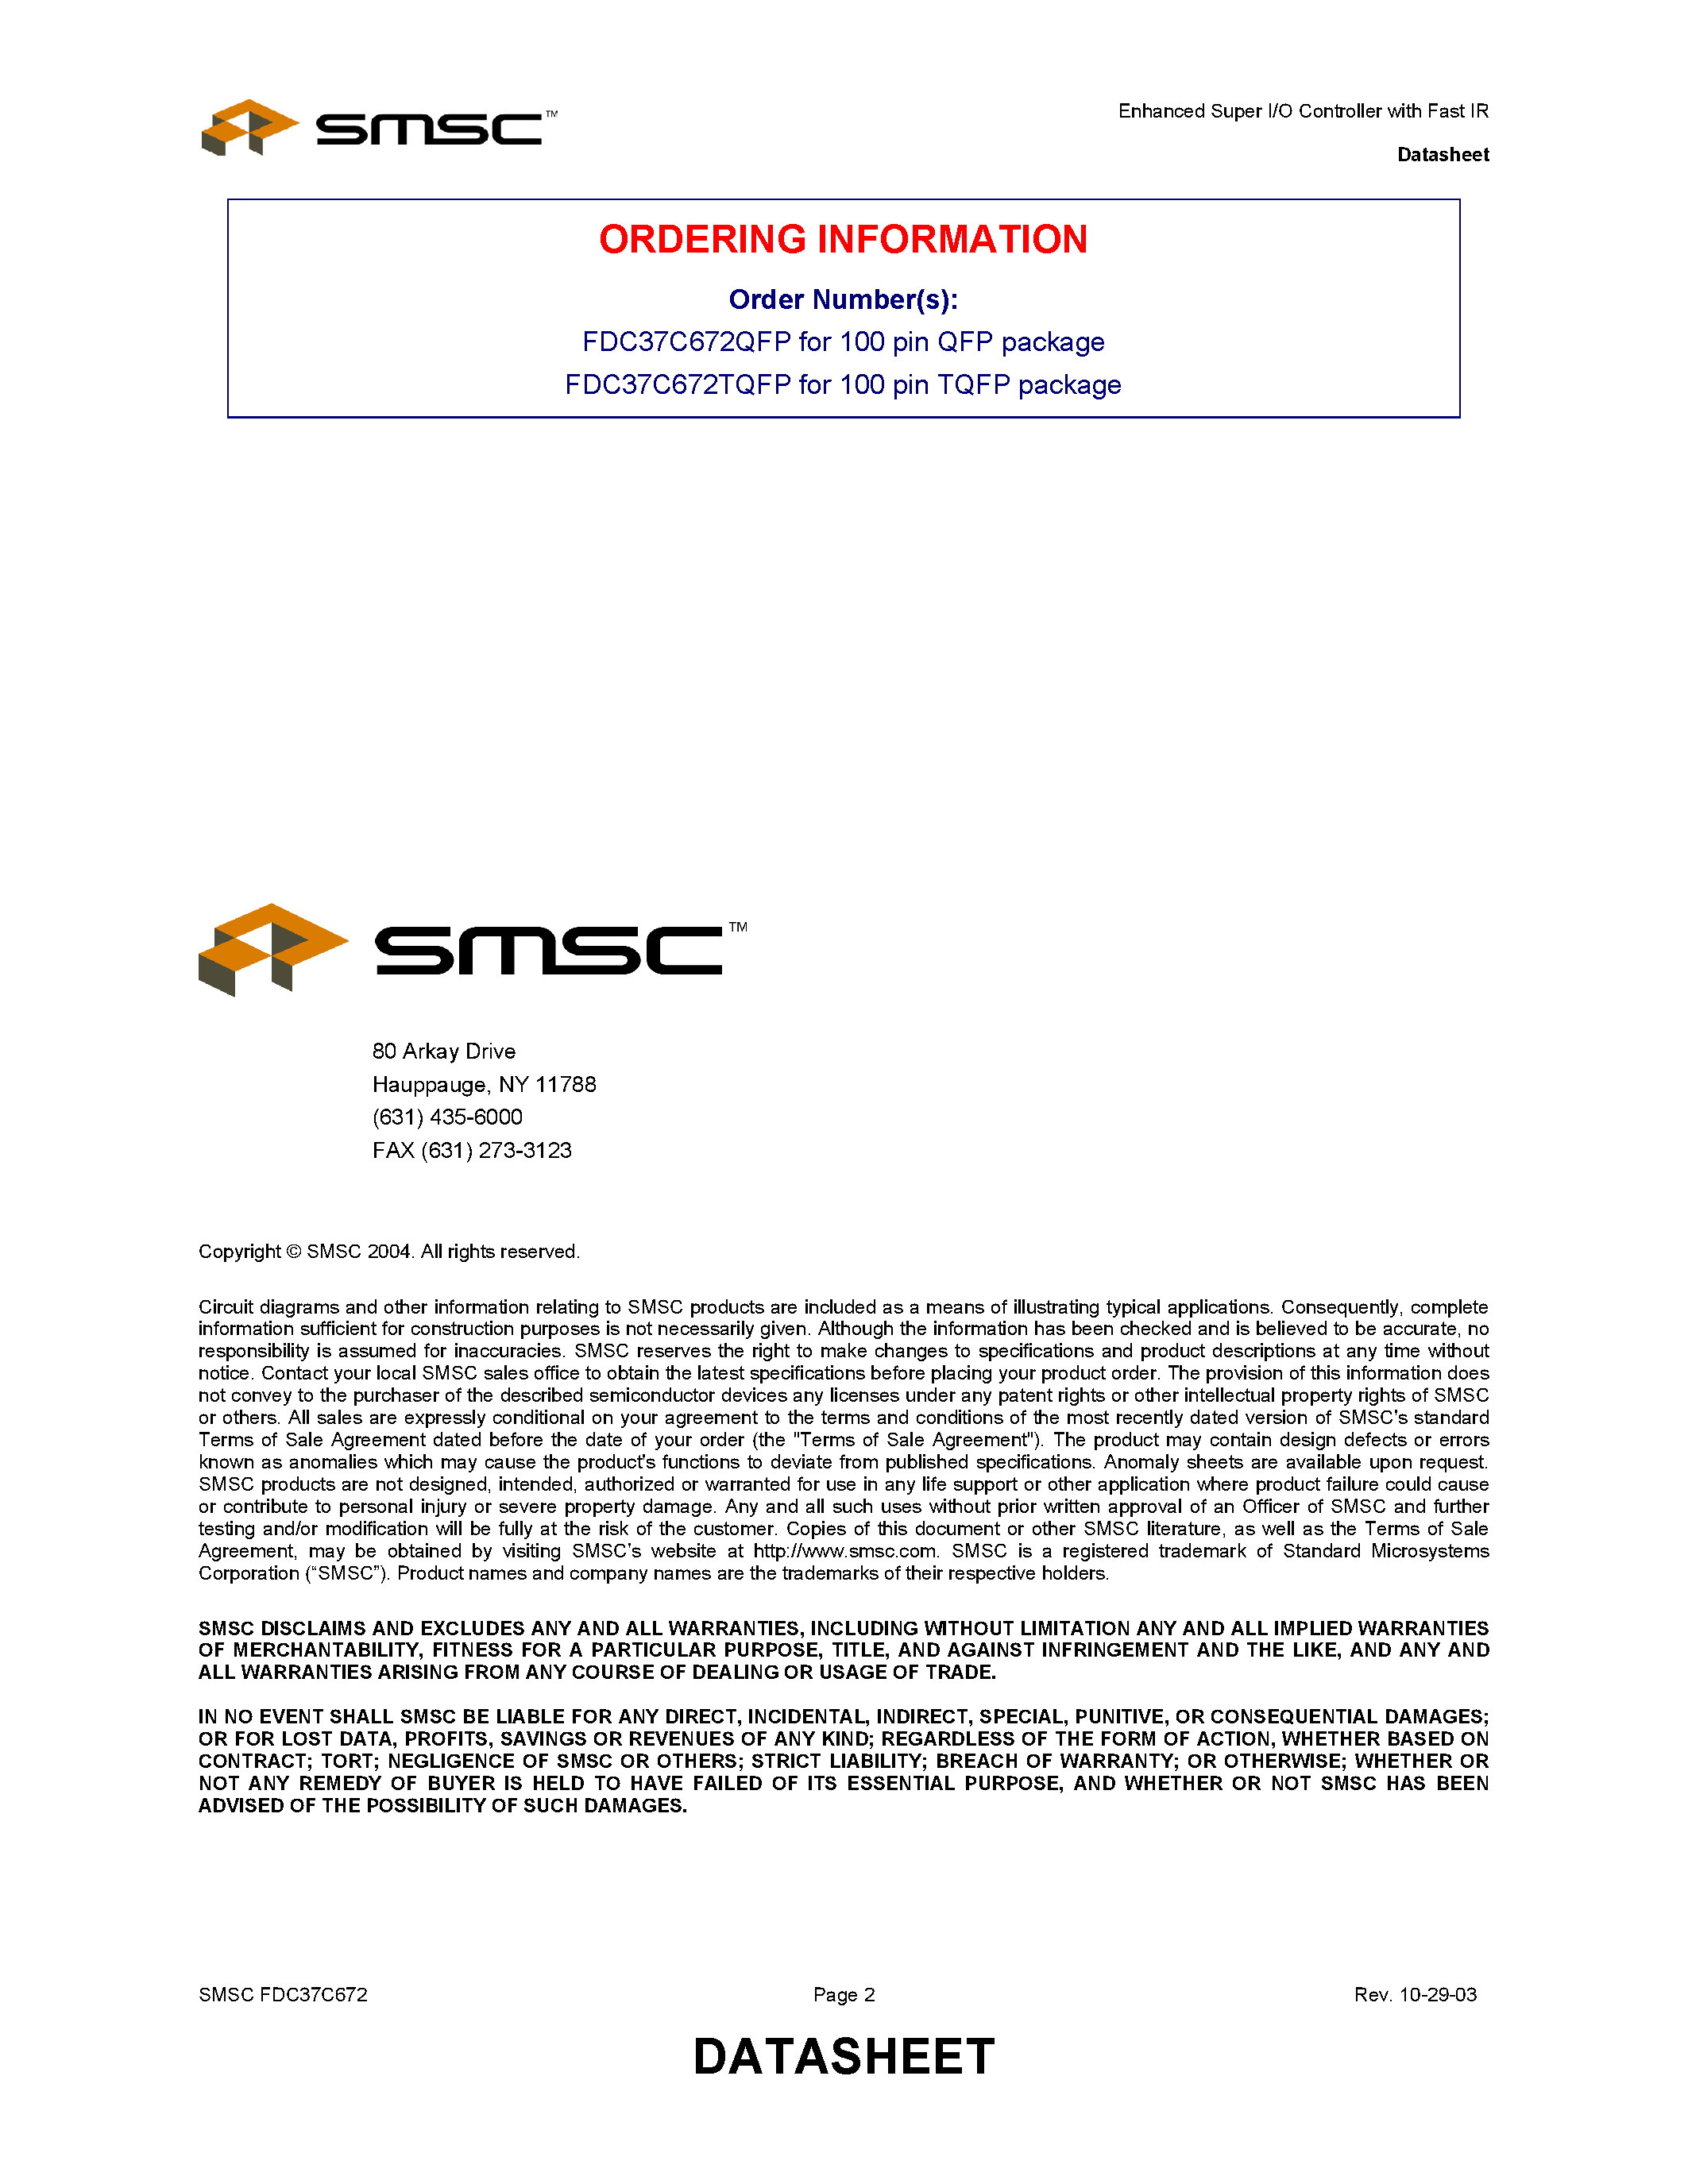 Datasheet FDC37C672 - ENHANCED SUPER I/O CONTROLLER WITH FAST IR page 2